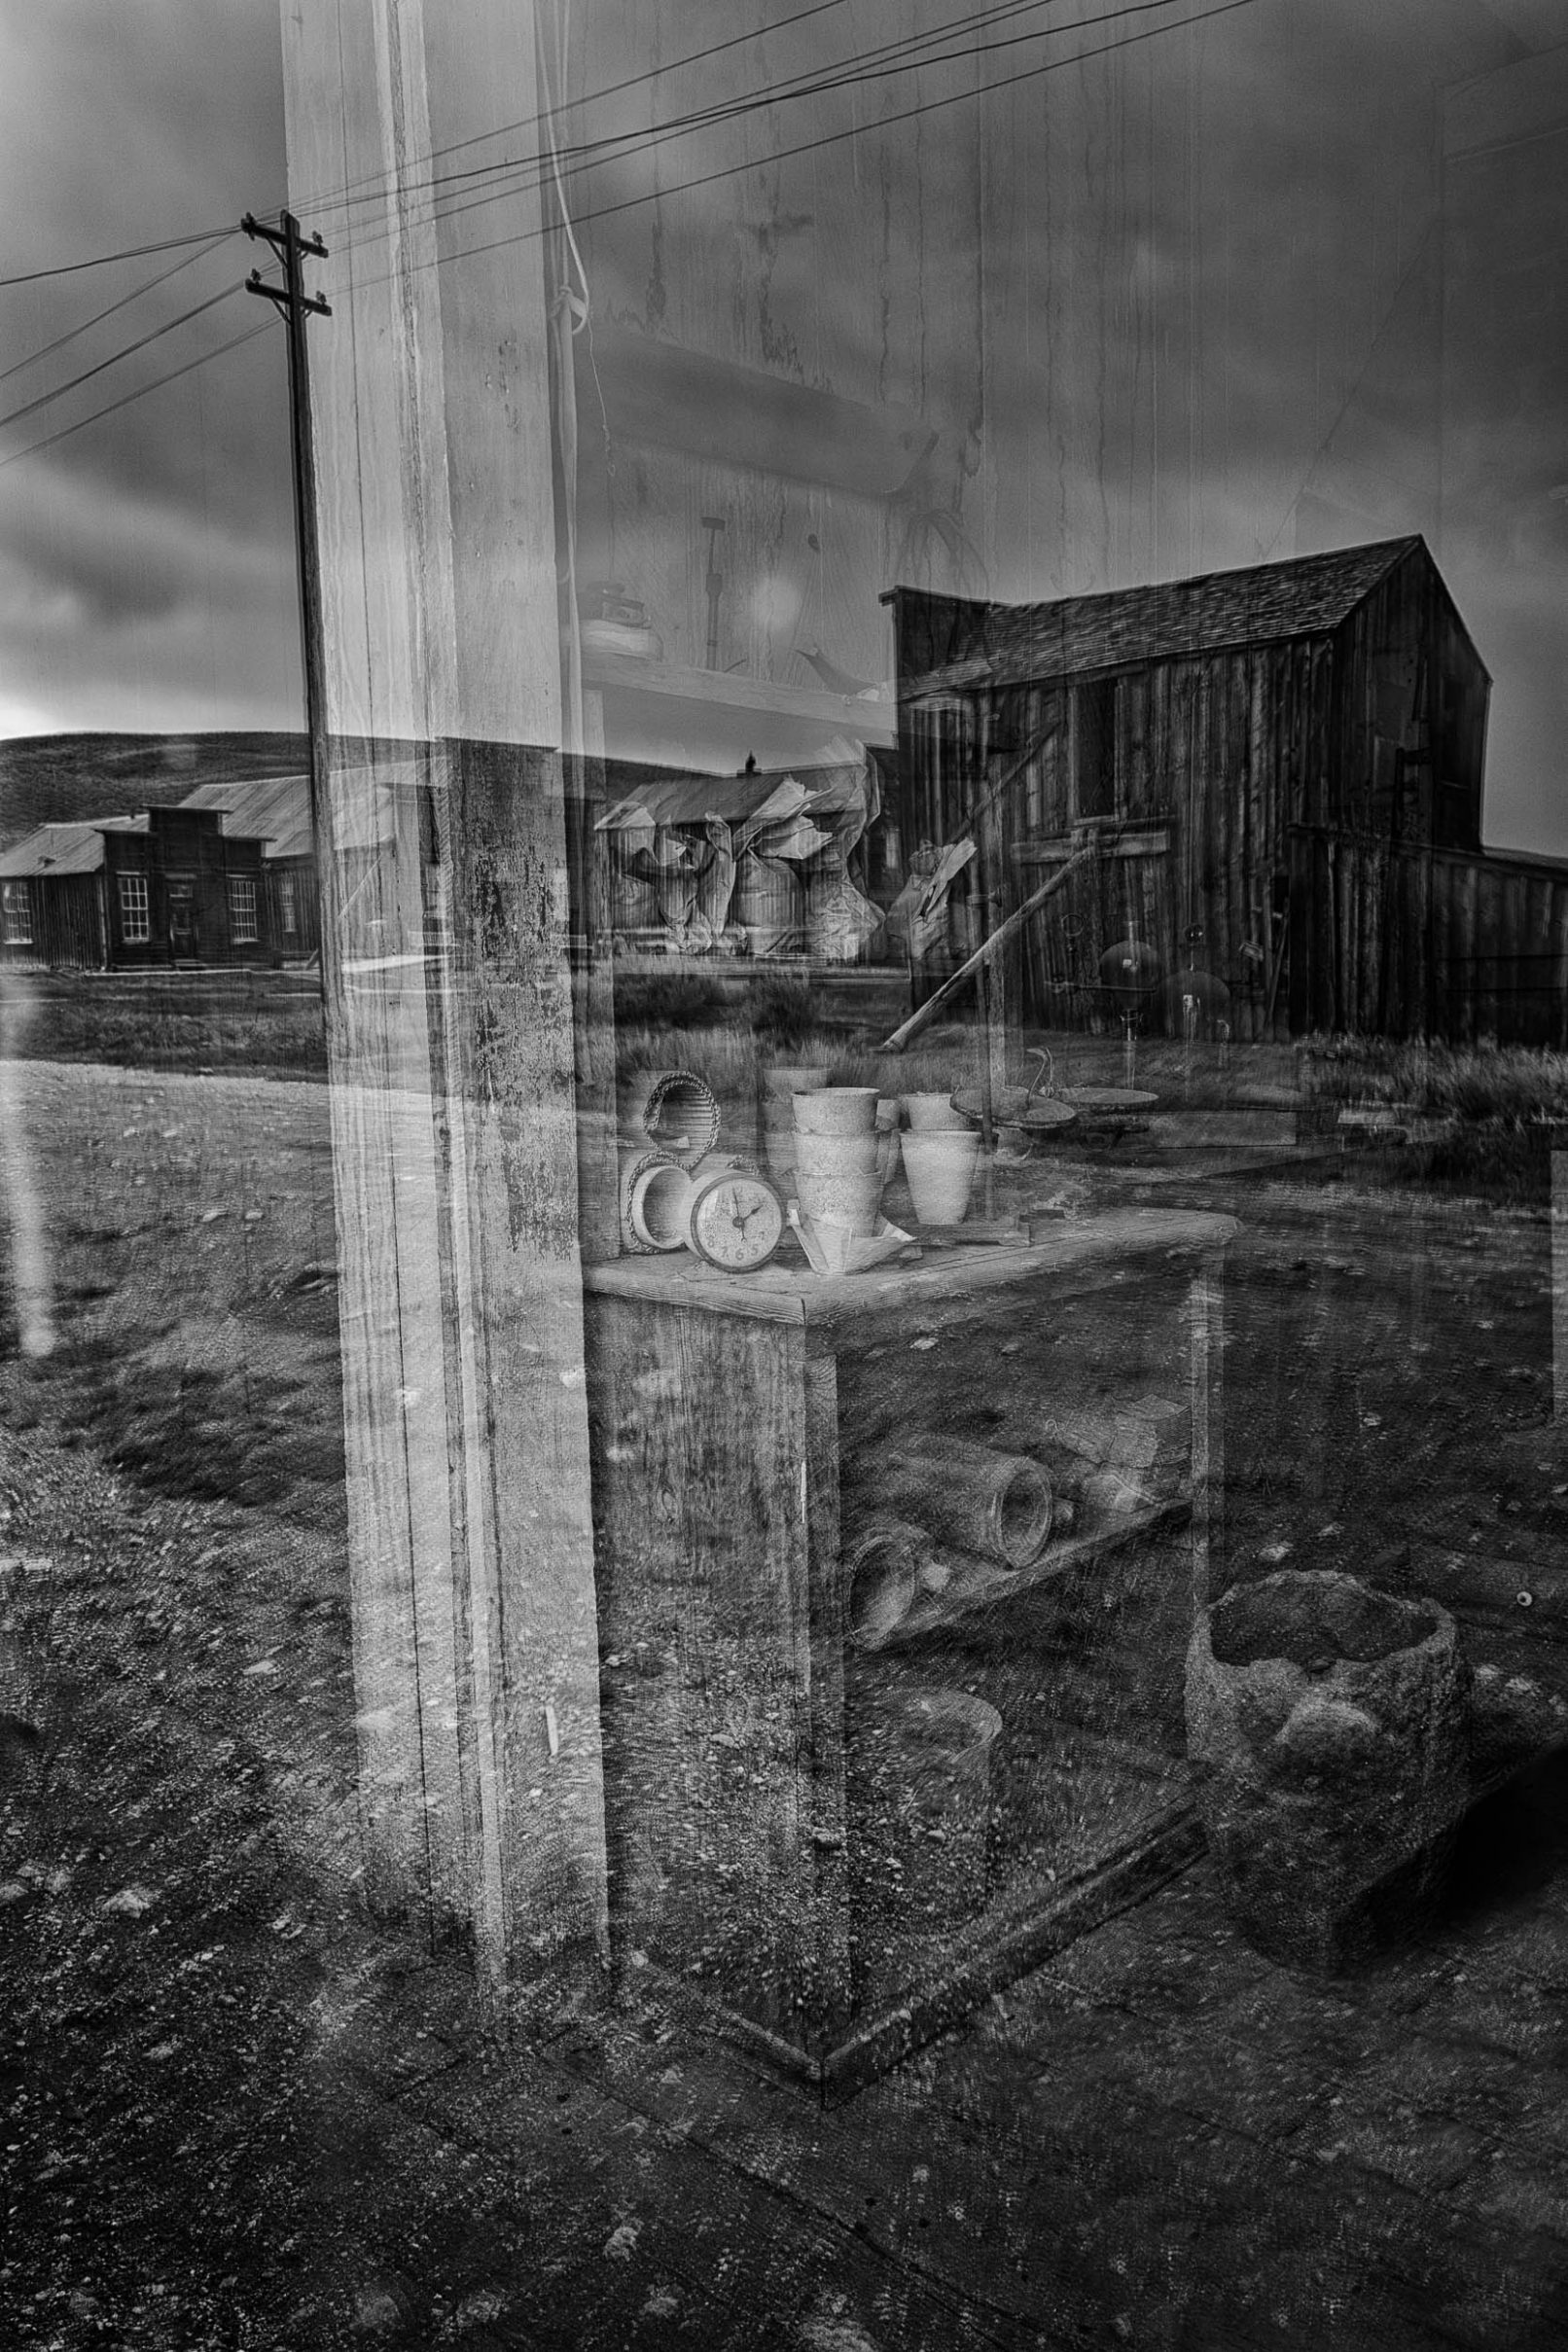 Street scene with reflections in Bodi, California ghost town